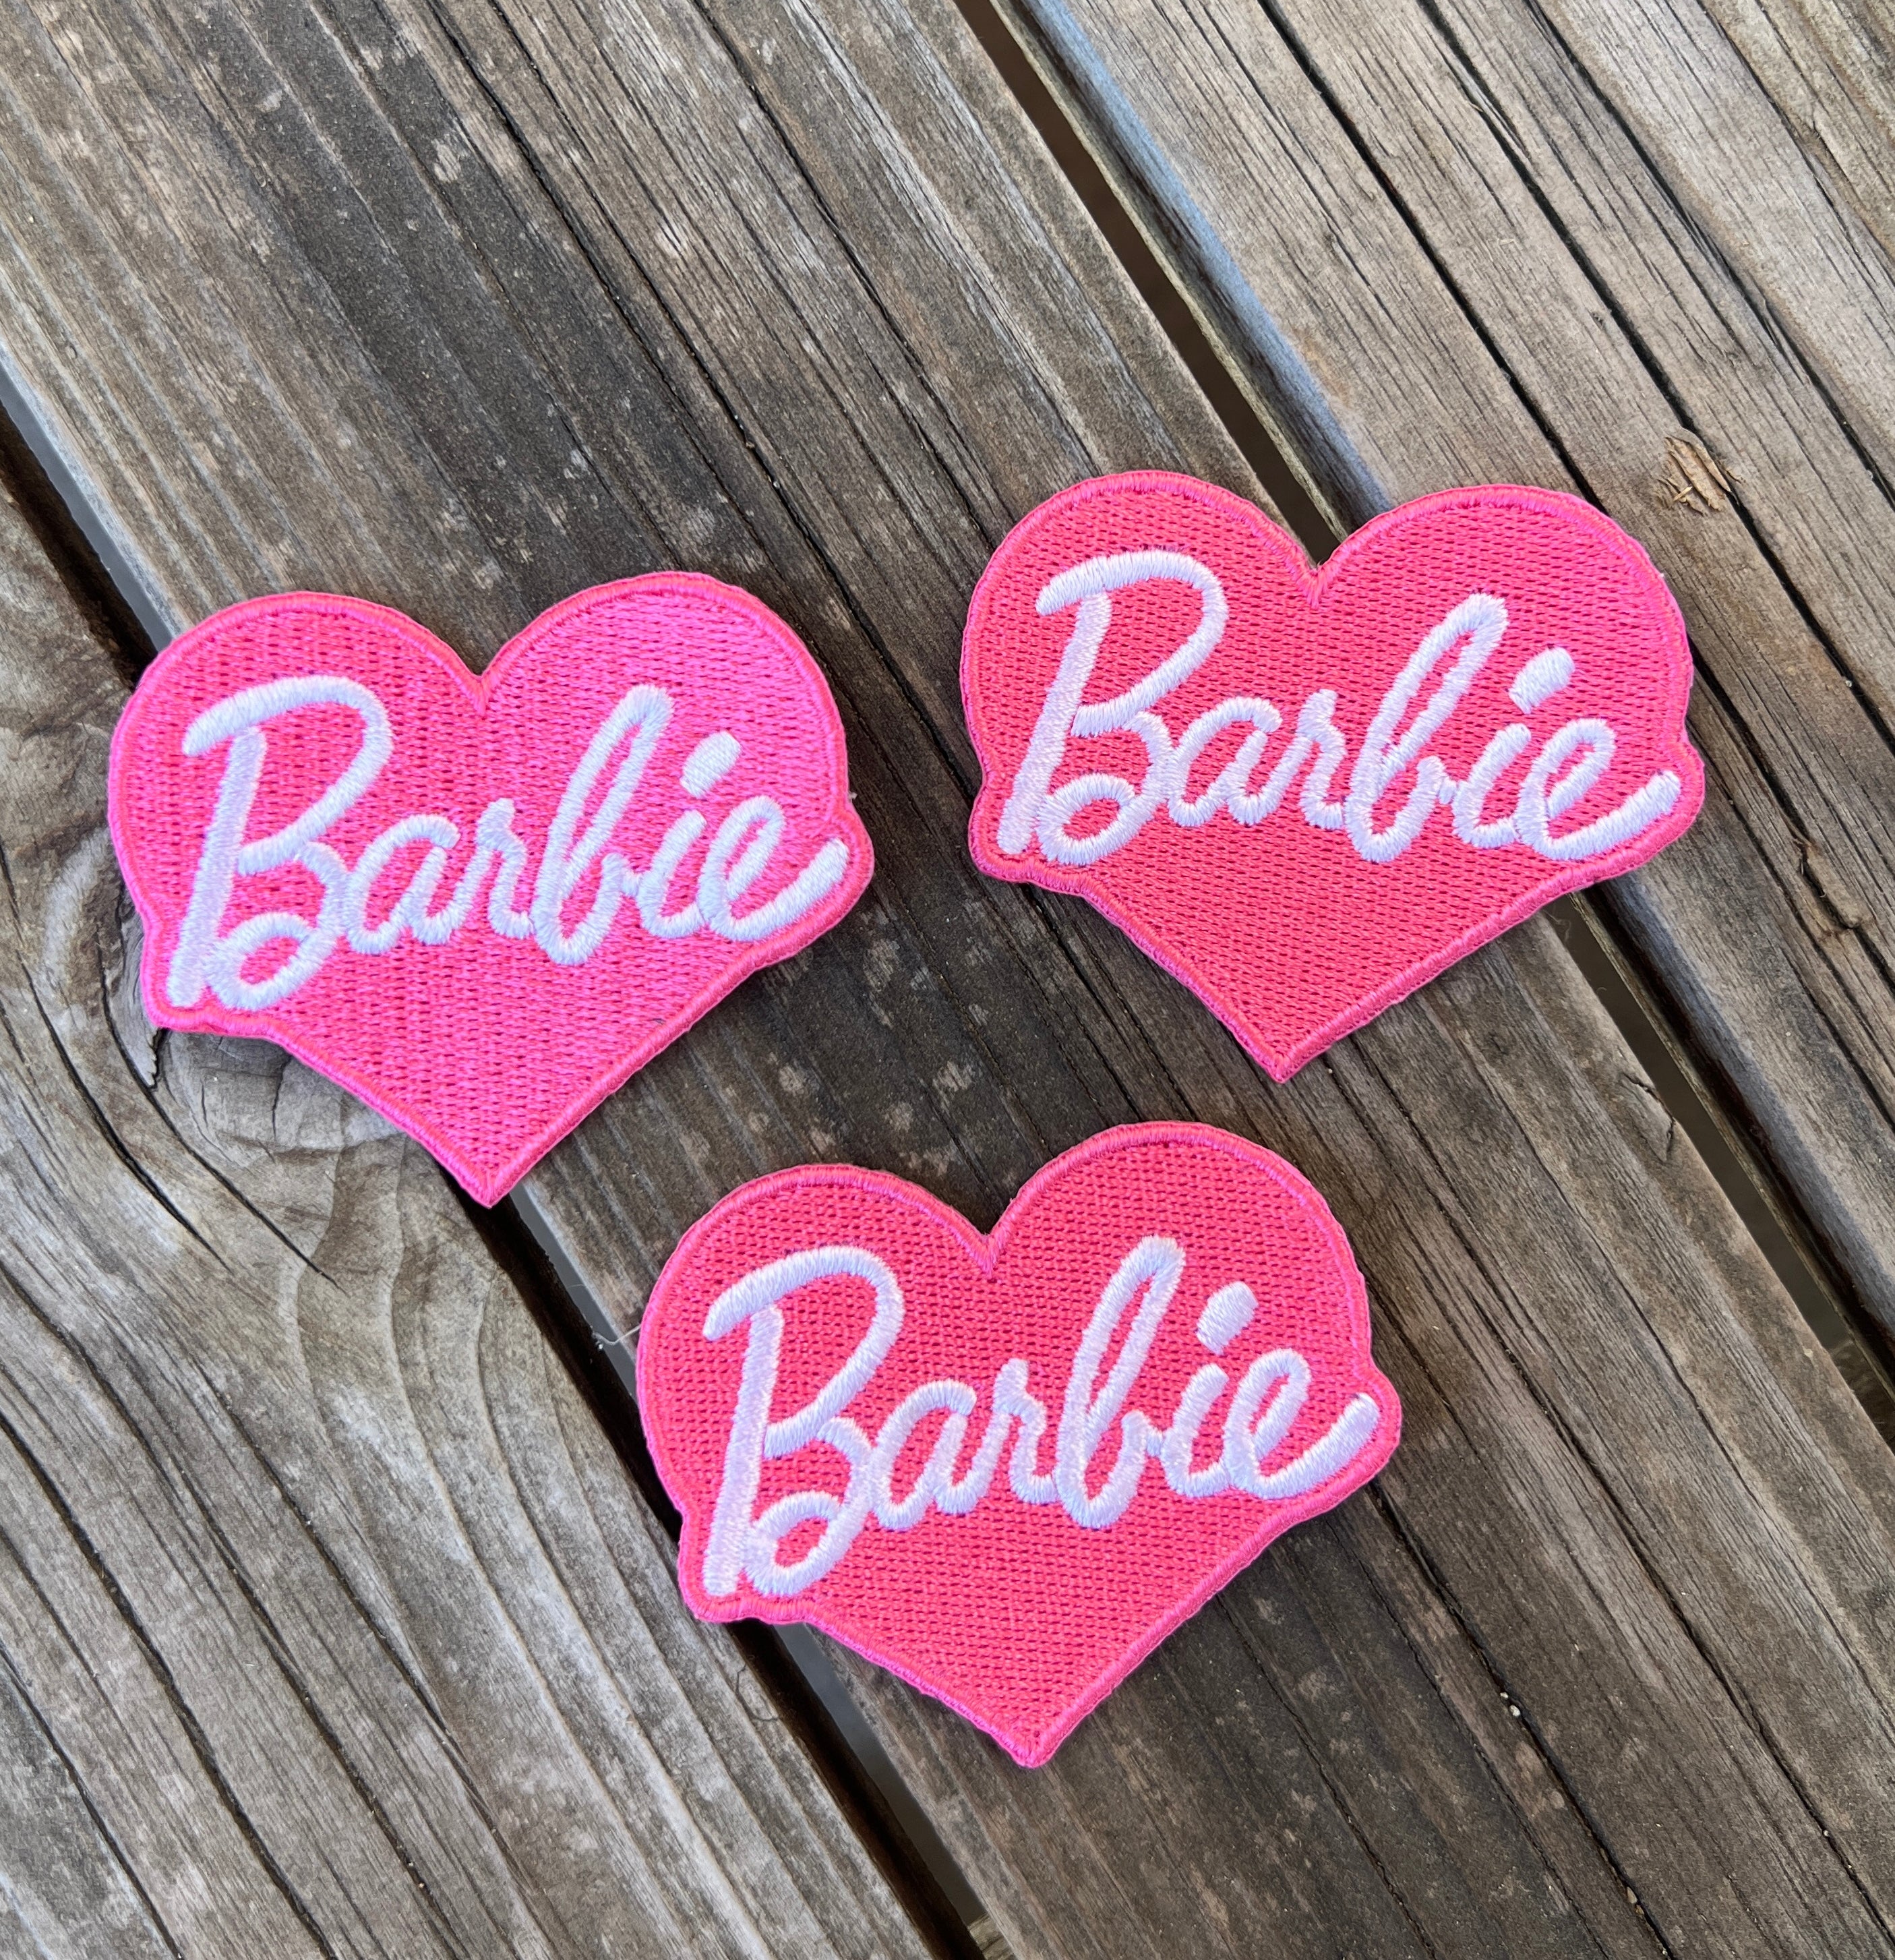 2PCS PINK Barbie Iron On Patches , Embroidery Iron On Patch , Pink